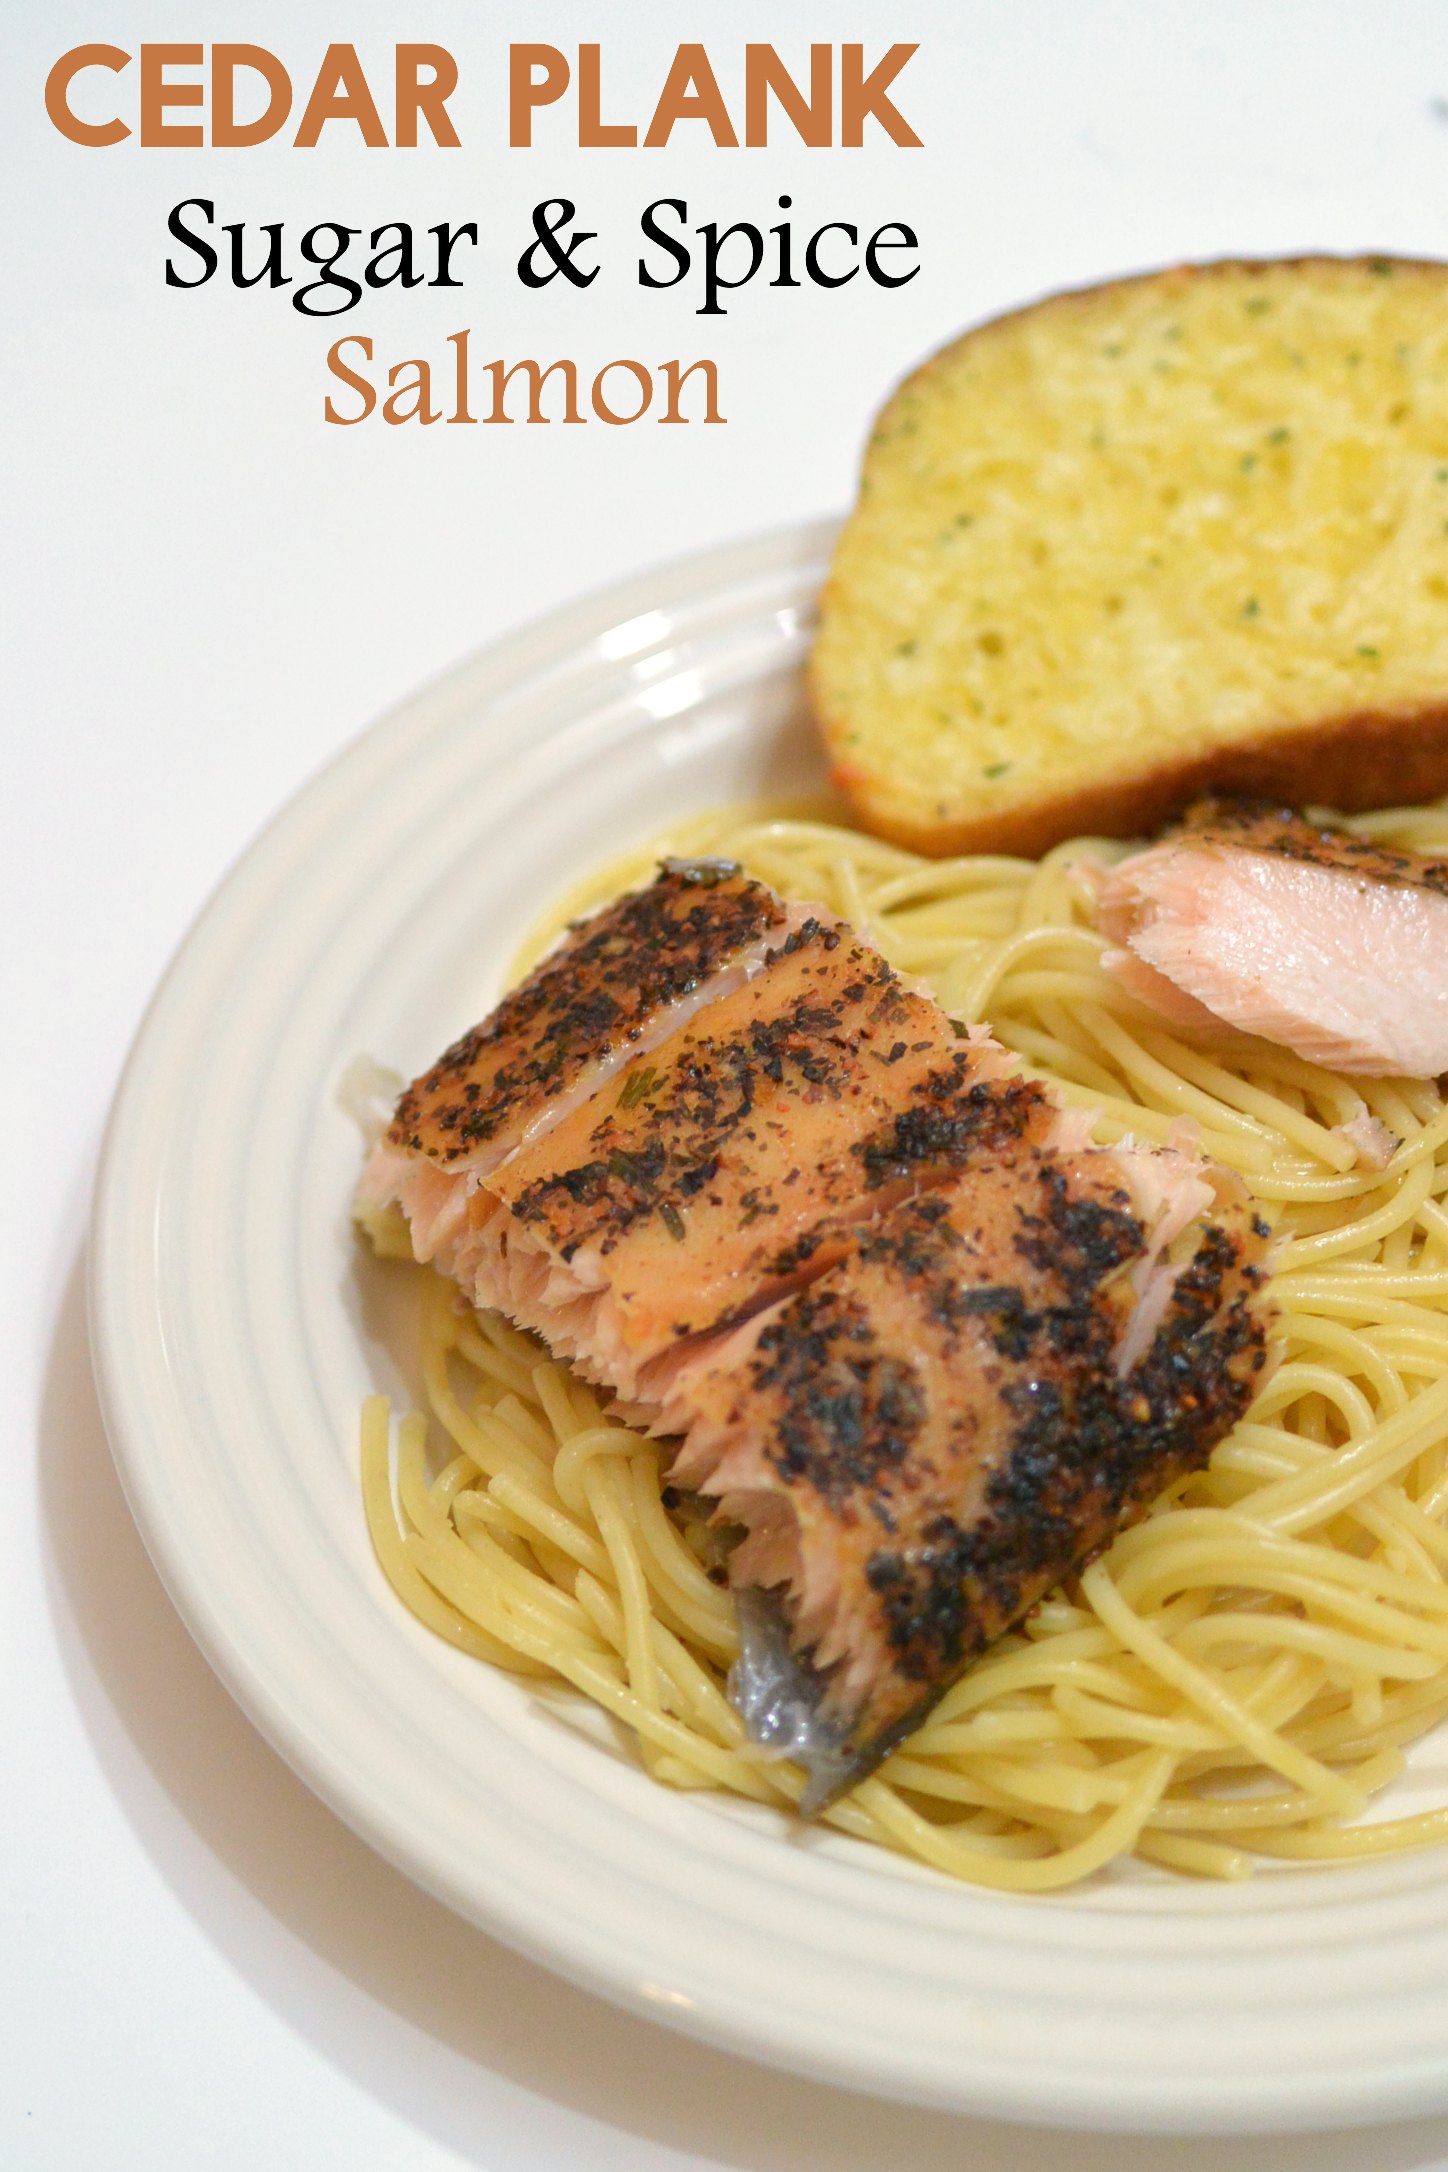 Cedar Plank Sugar and Spice Salmon - make it on the grill or in the oven